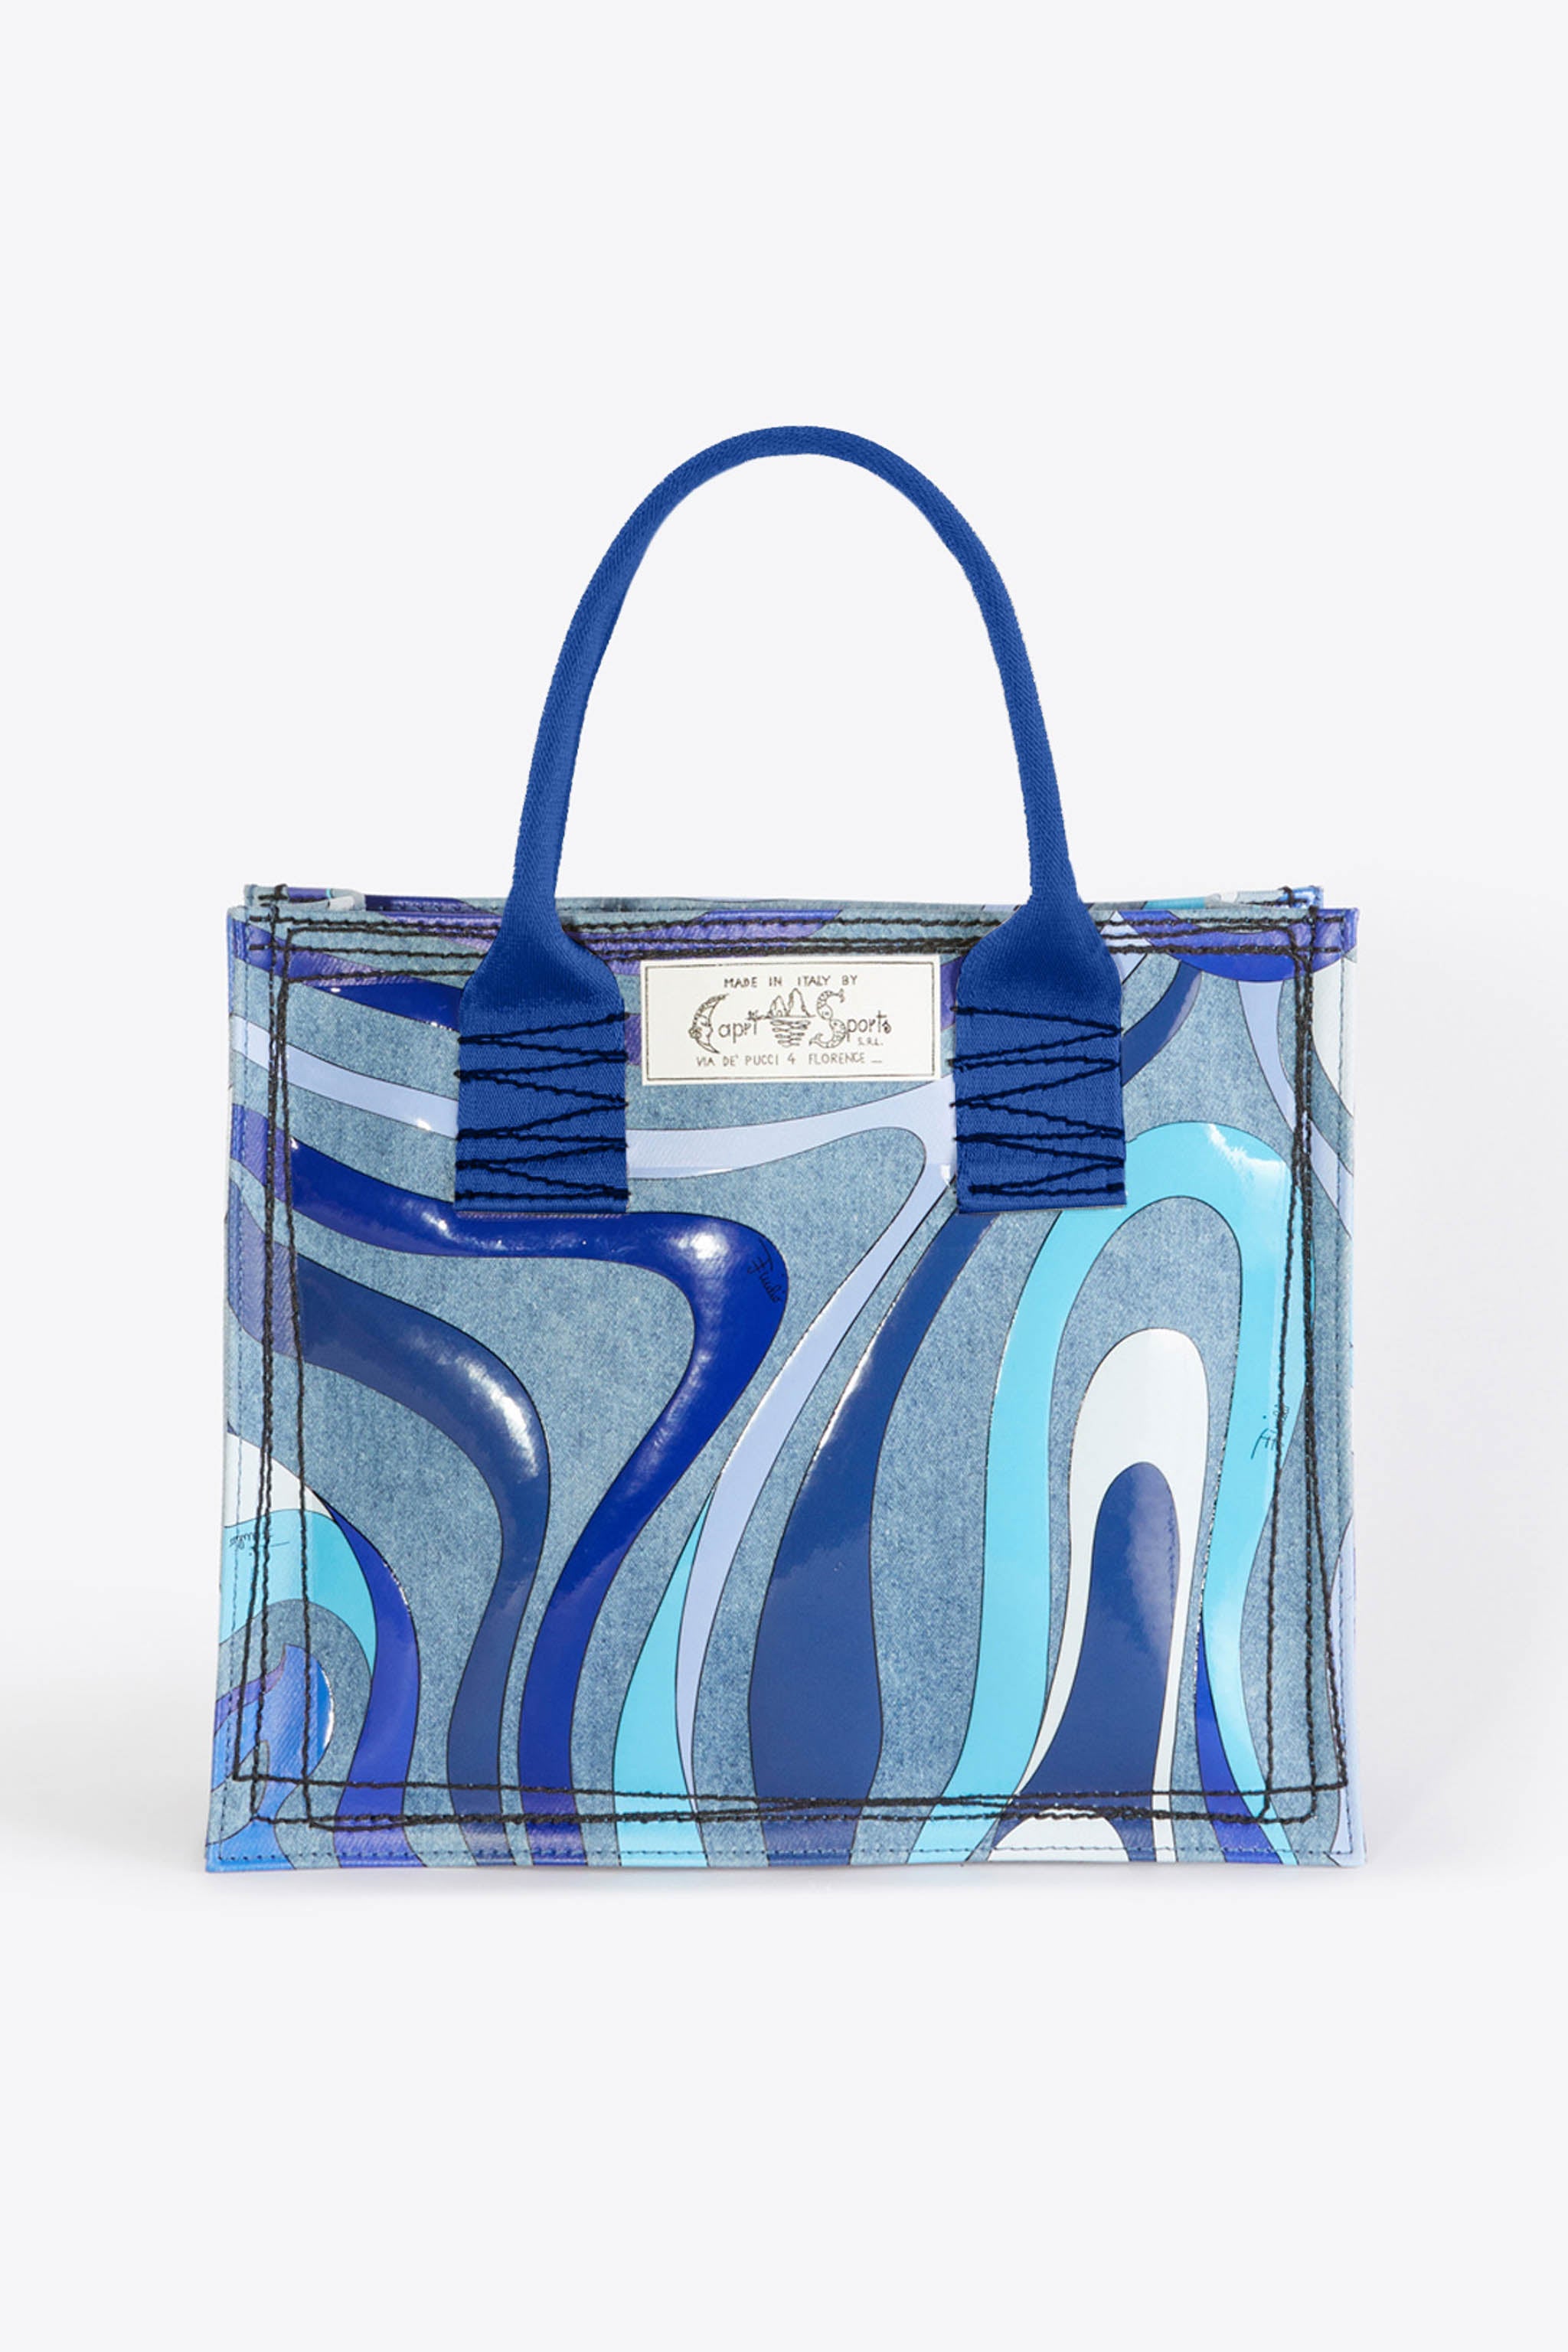 Kenzo Printed Coated Canvas Tote Bag Made In Italy